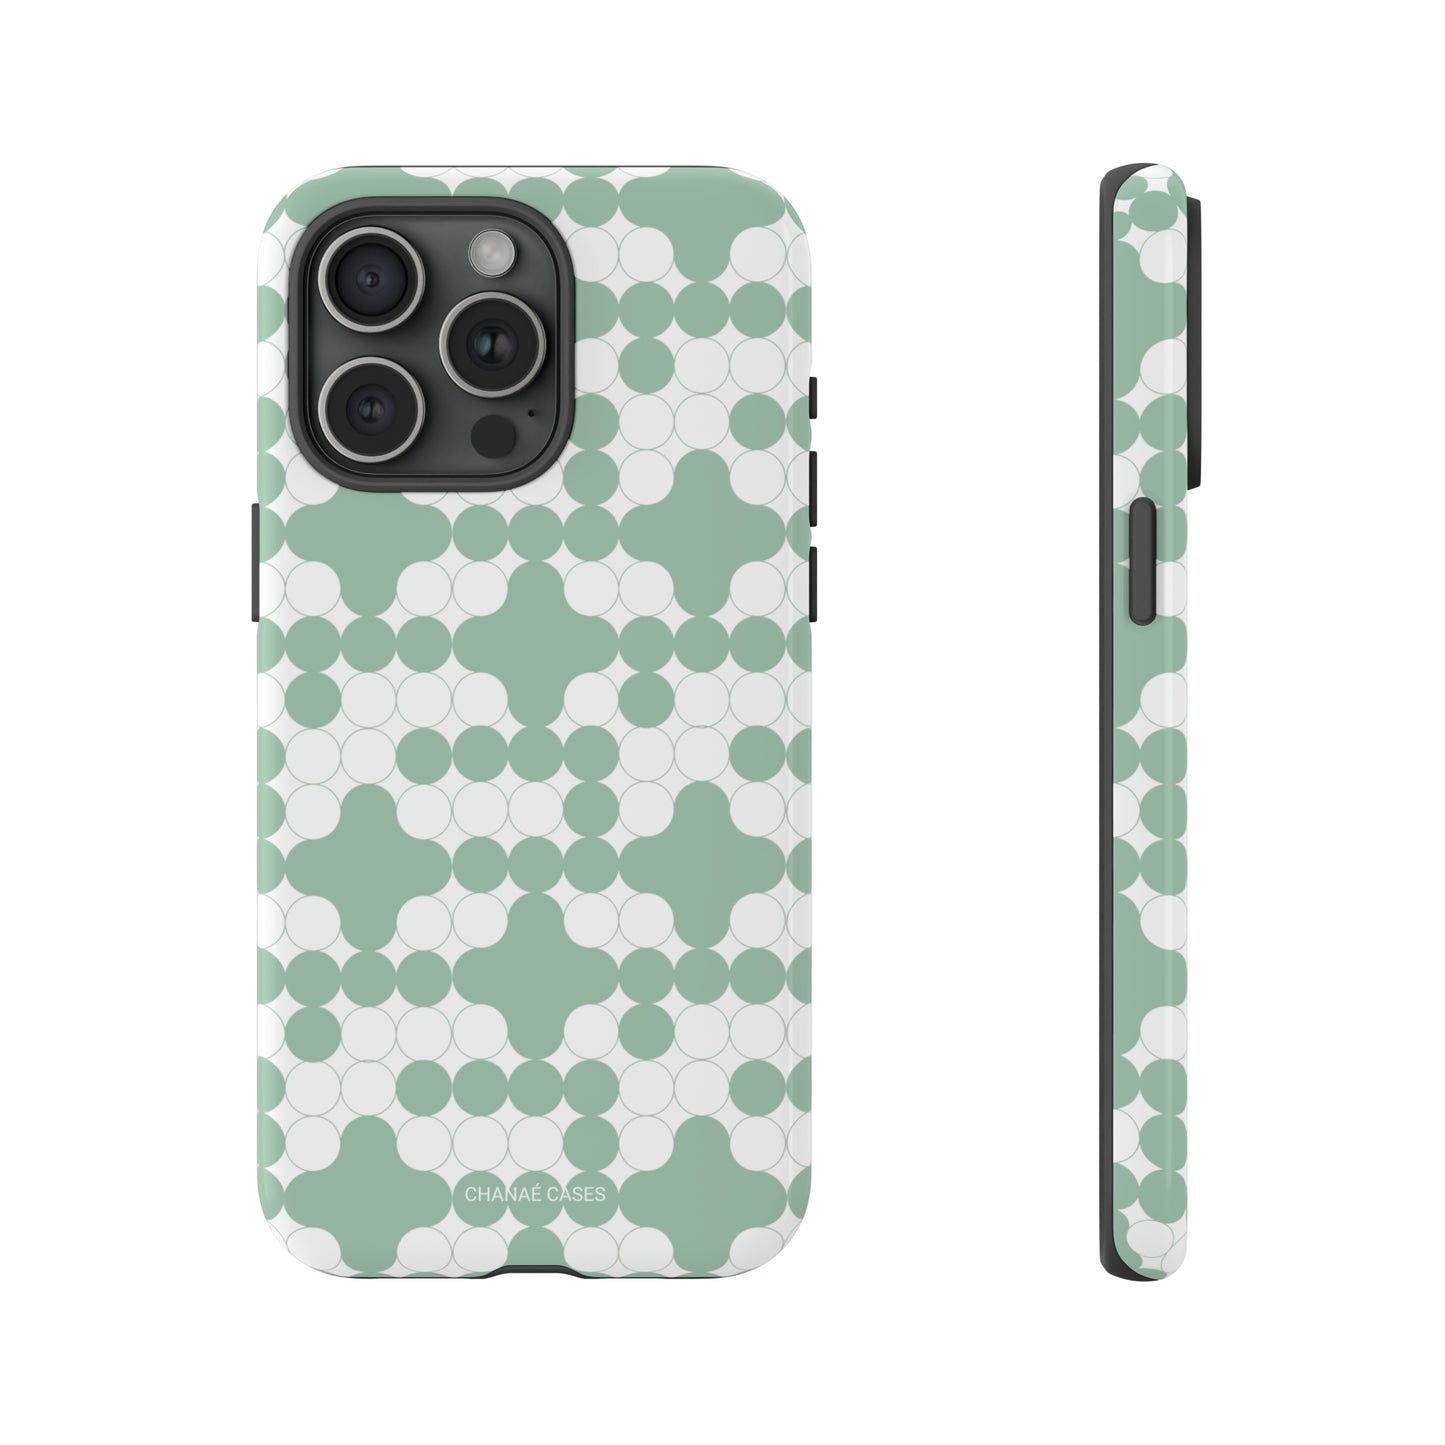 Enzyme iPhone "Tough" Case (Grayed Jade/White)